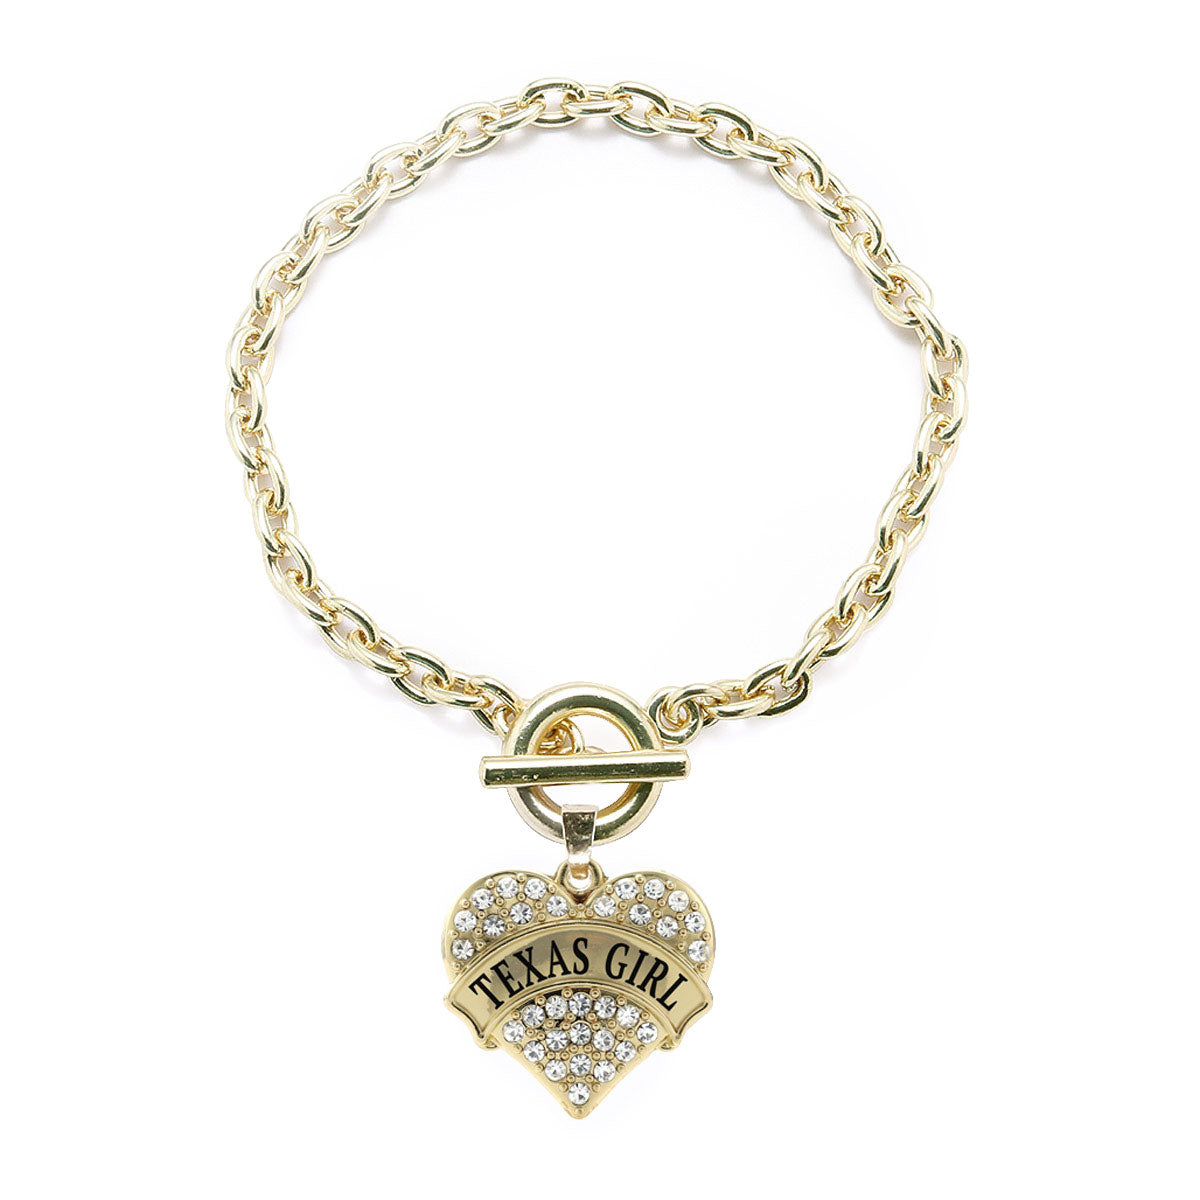 Gold Texas Girl Pave Heart Charm Toggle Bracelet